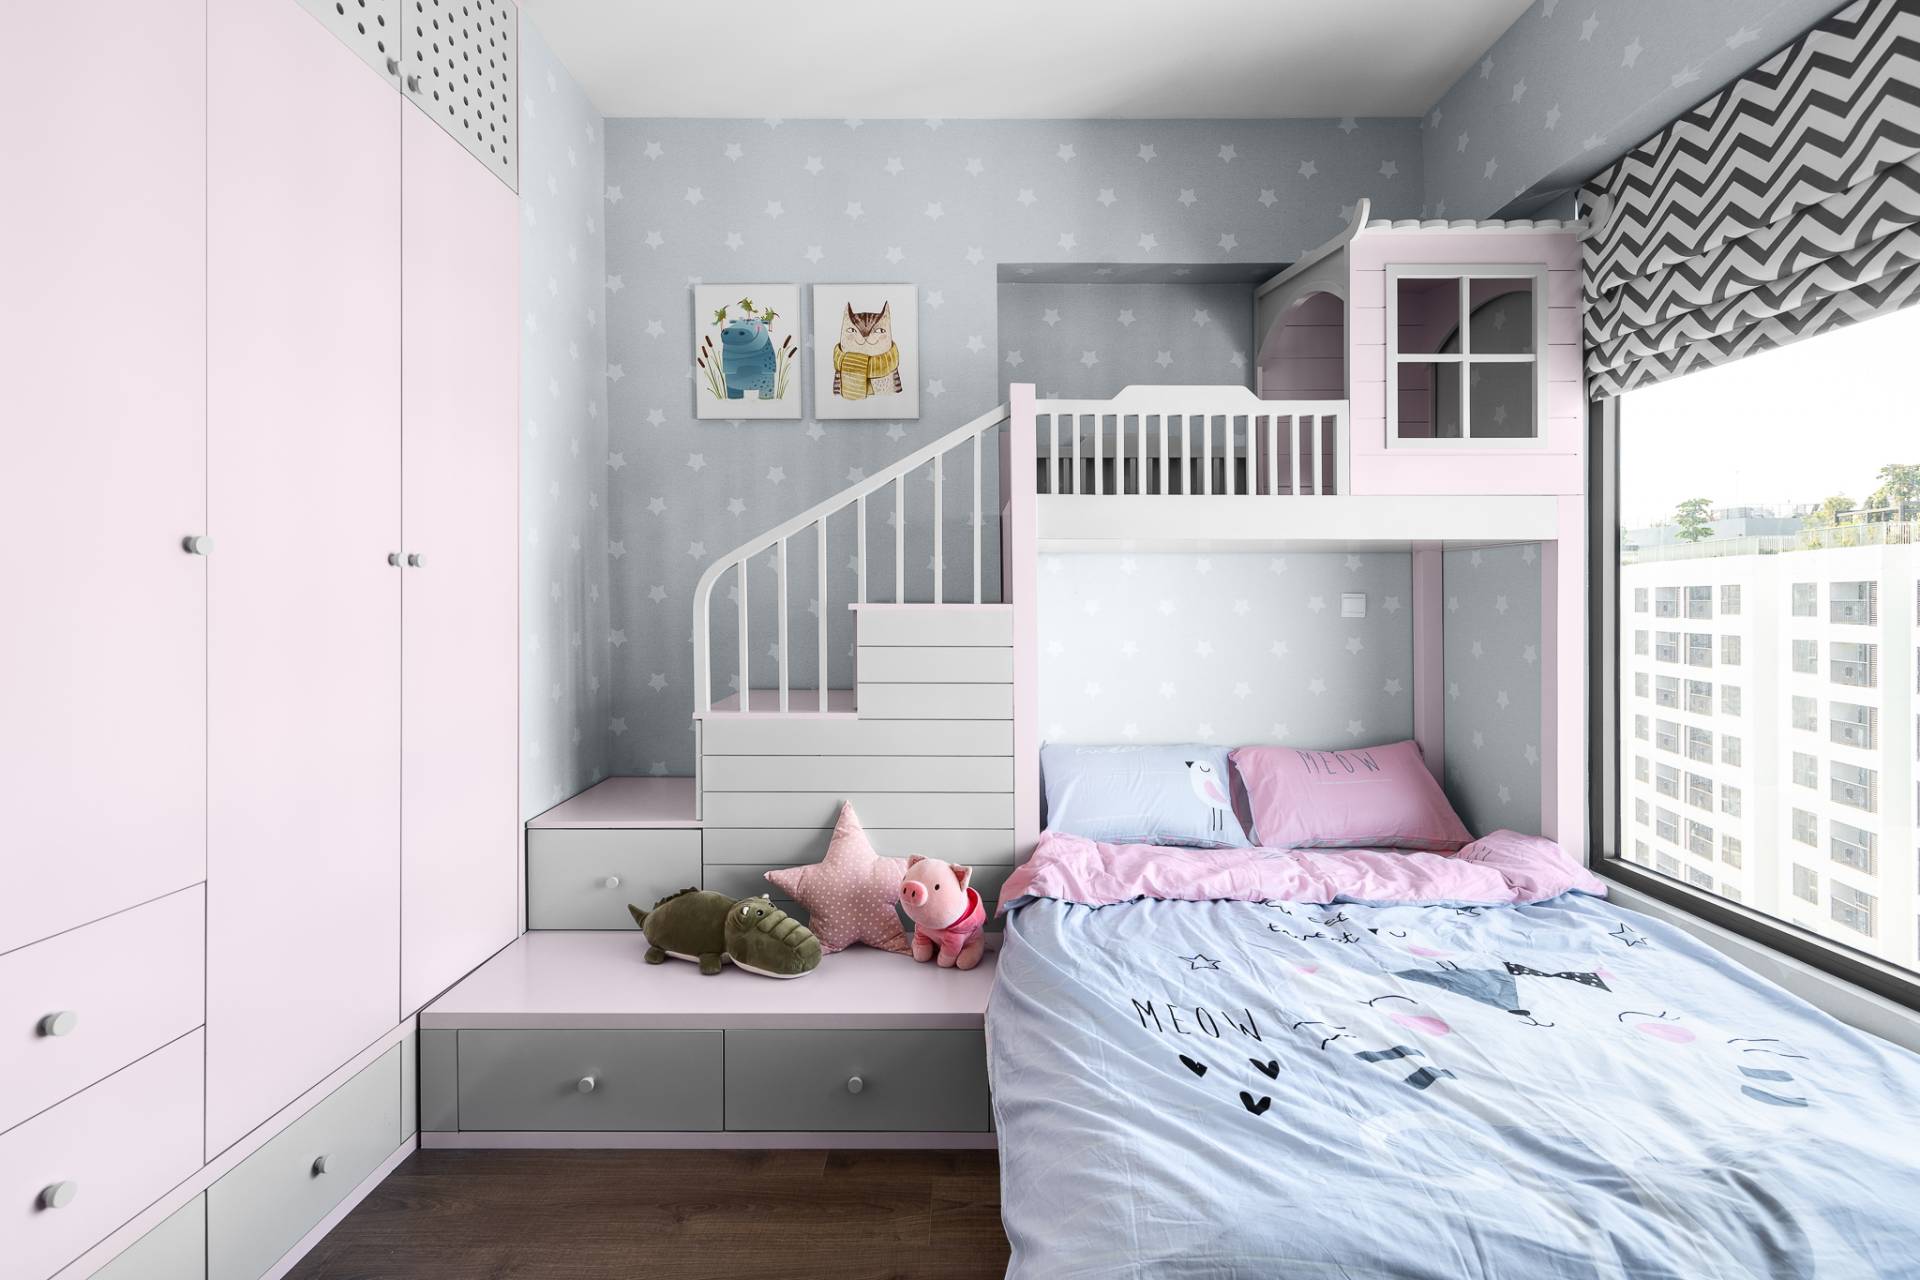 Sleeping space for children is adorned with bright colors